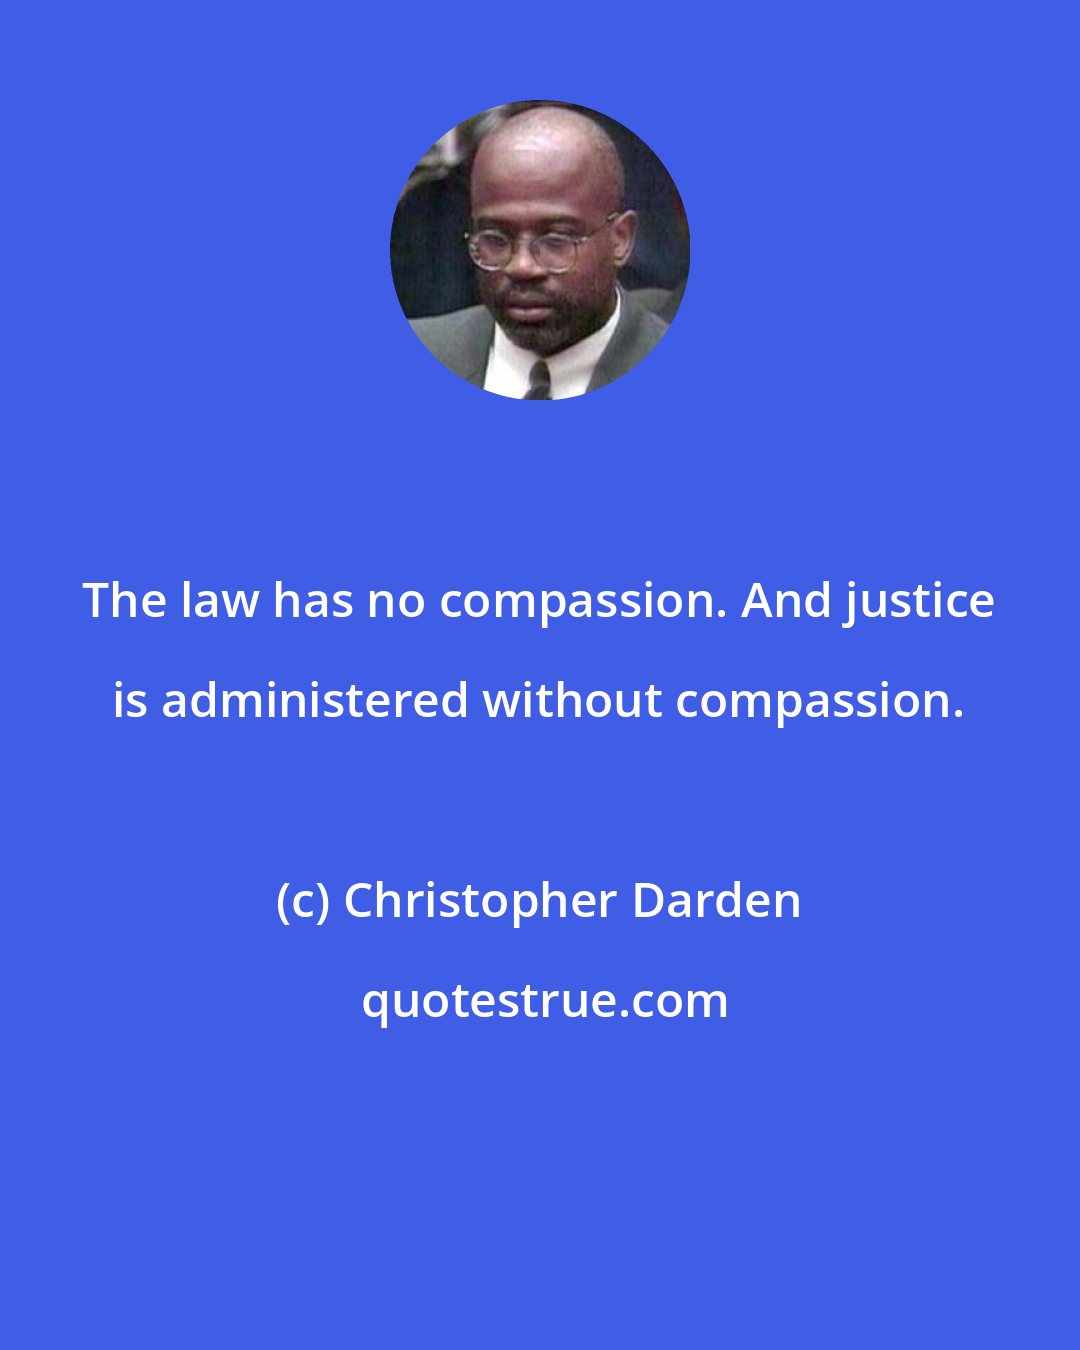 Christopher Darden: The law has no compassion. And justice is administered without compassion.